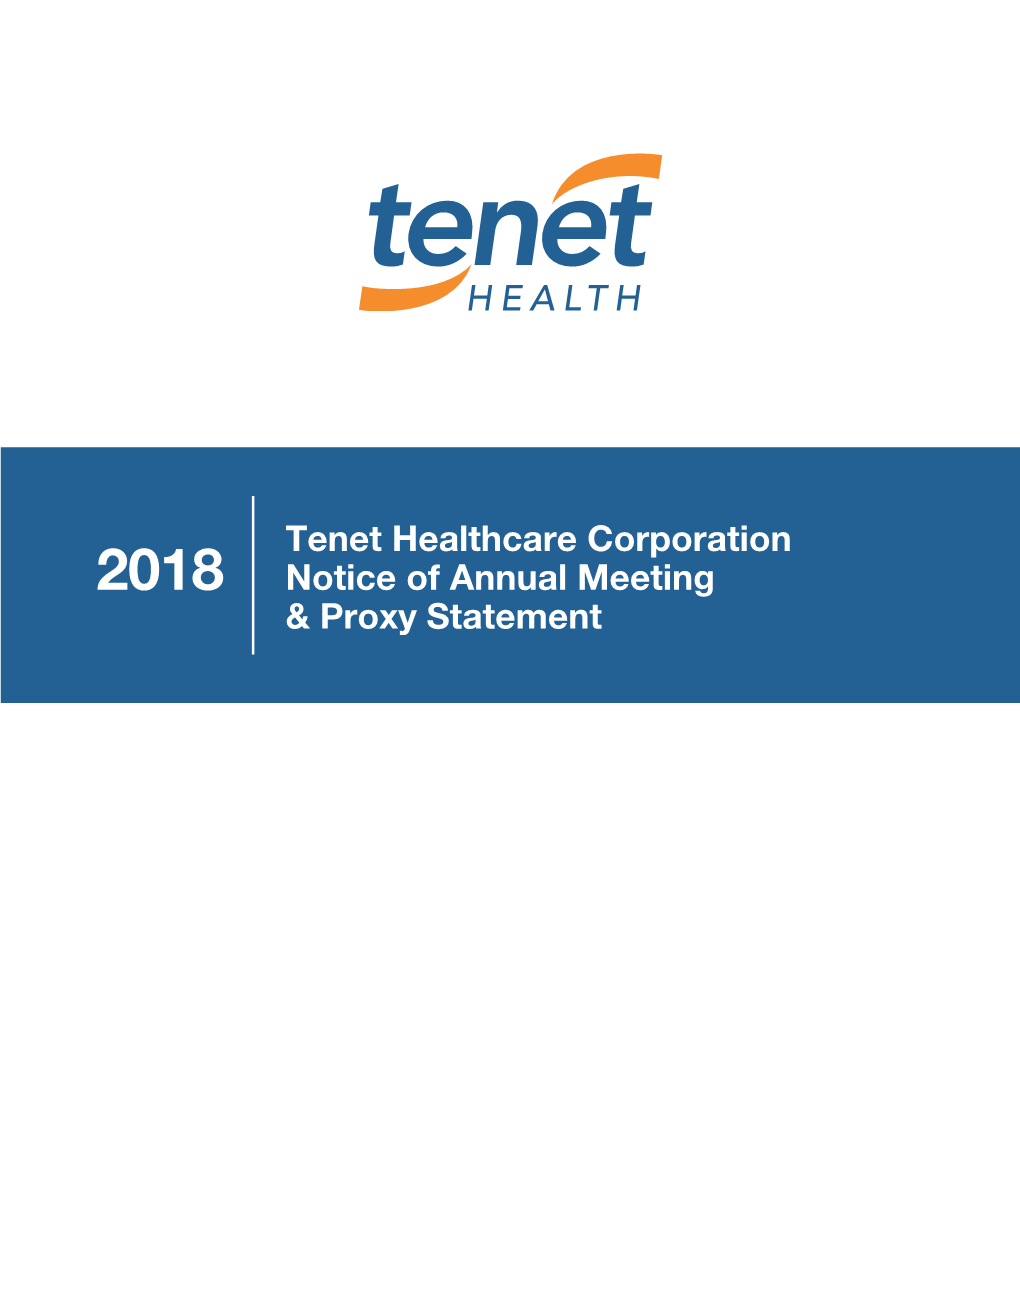 Tenet Healthcare Corporation Notice of Annual Meeting & Proxy Statement